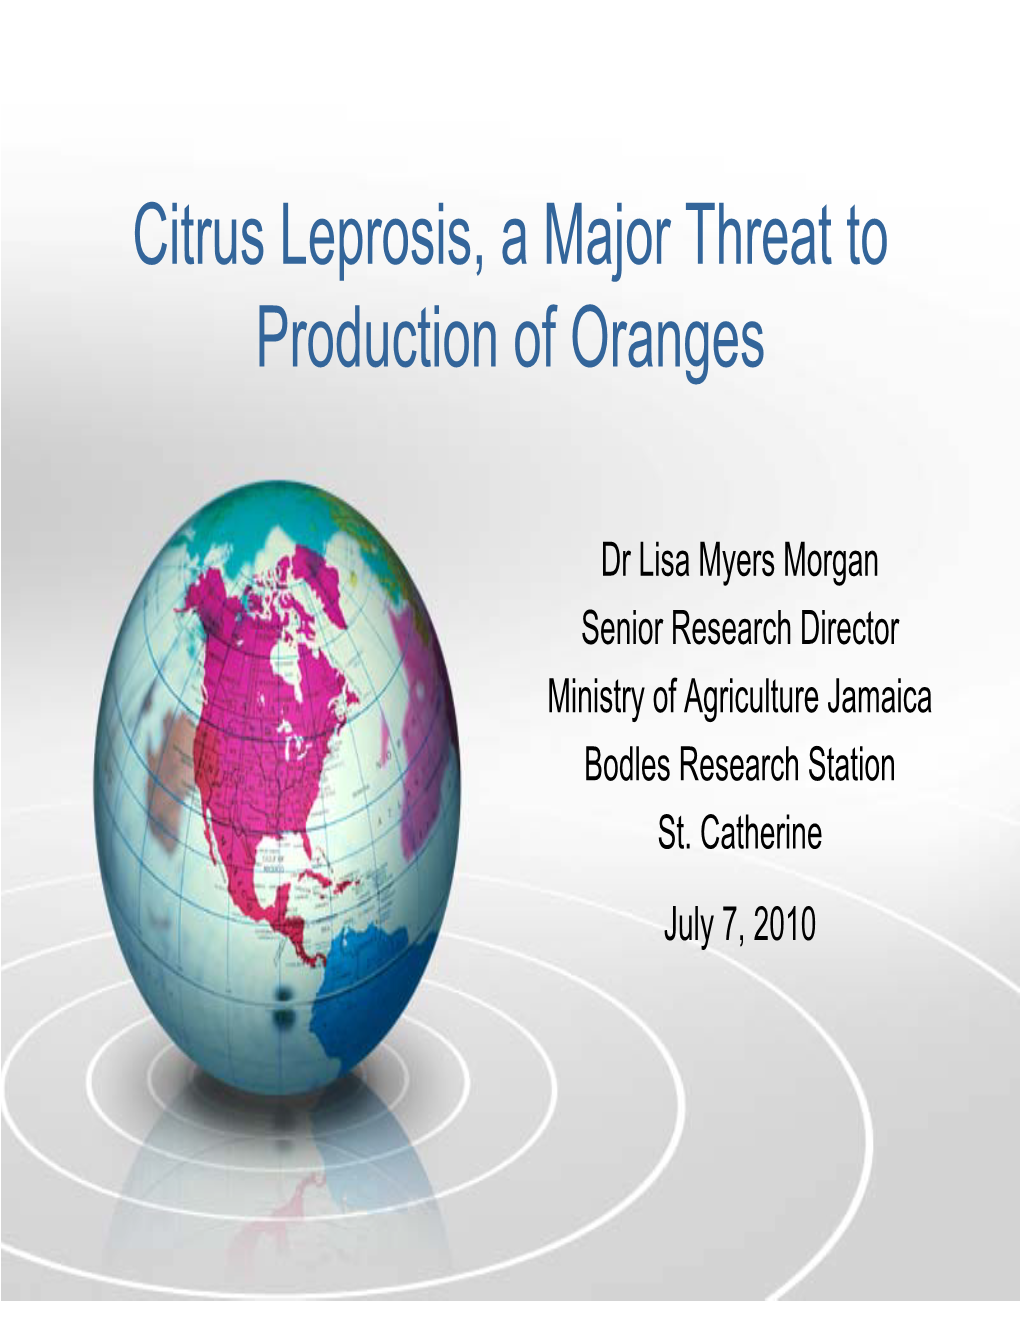 Citrus Leprosis, a Major Threat to Production of Oranges